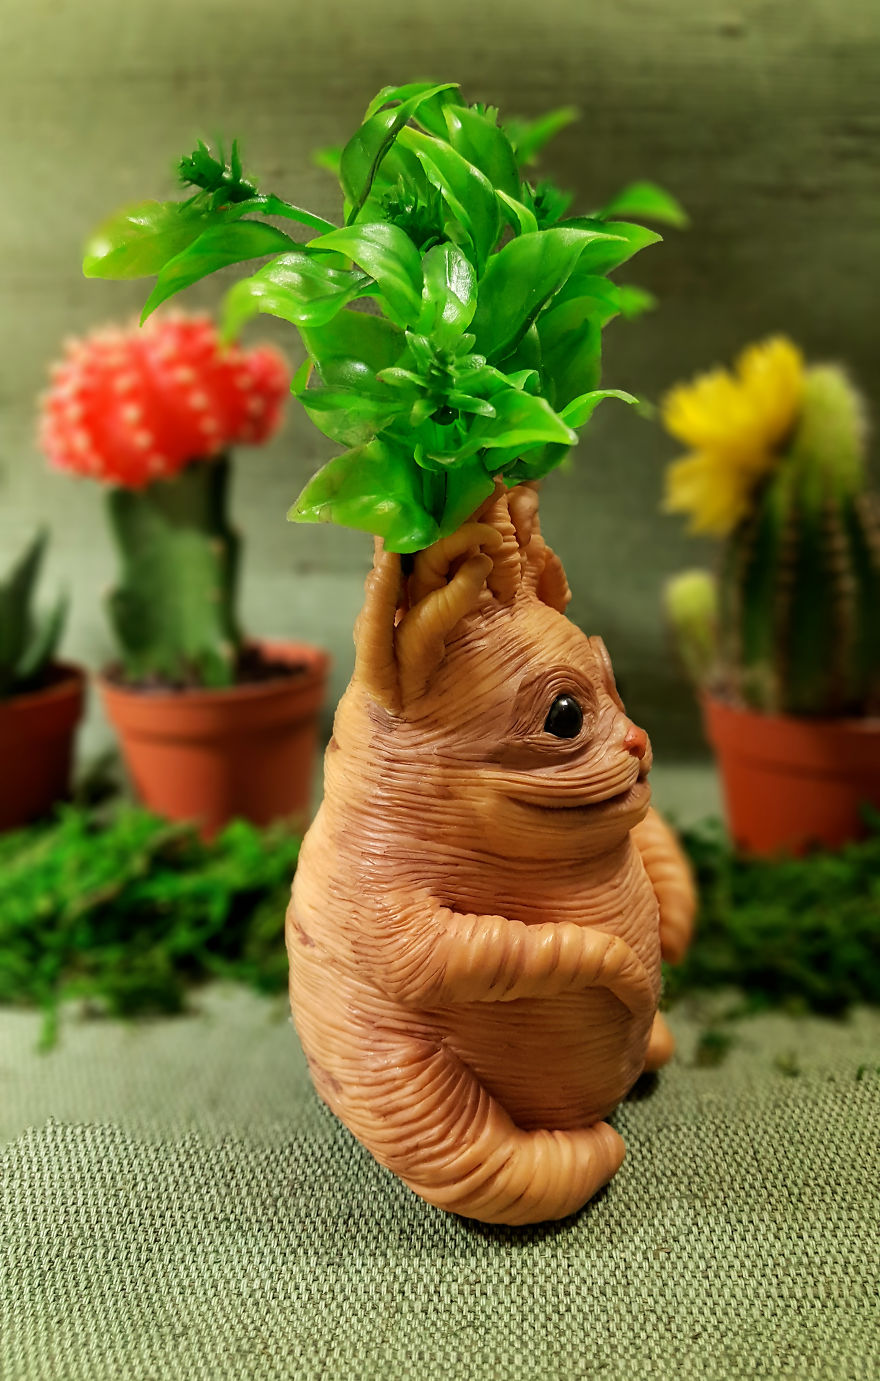 We Create Mandrake Root Dolls From The Movie “Harry Potter”